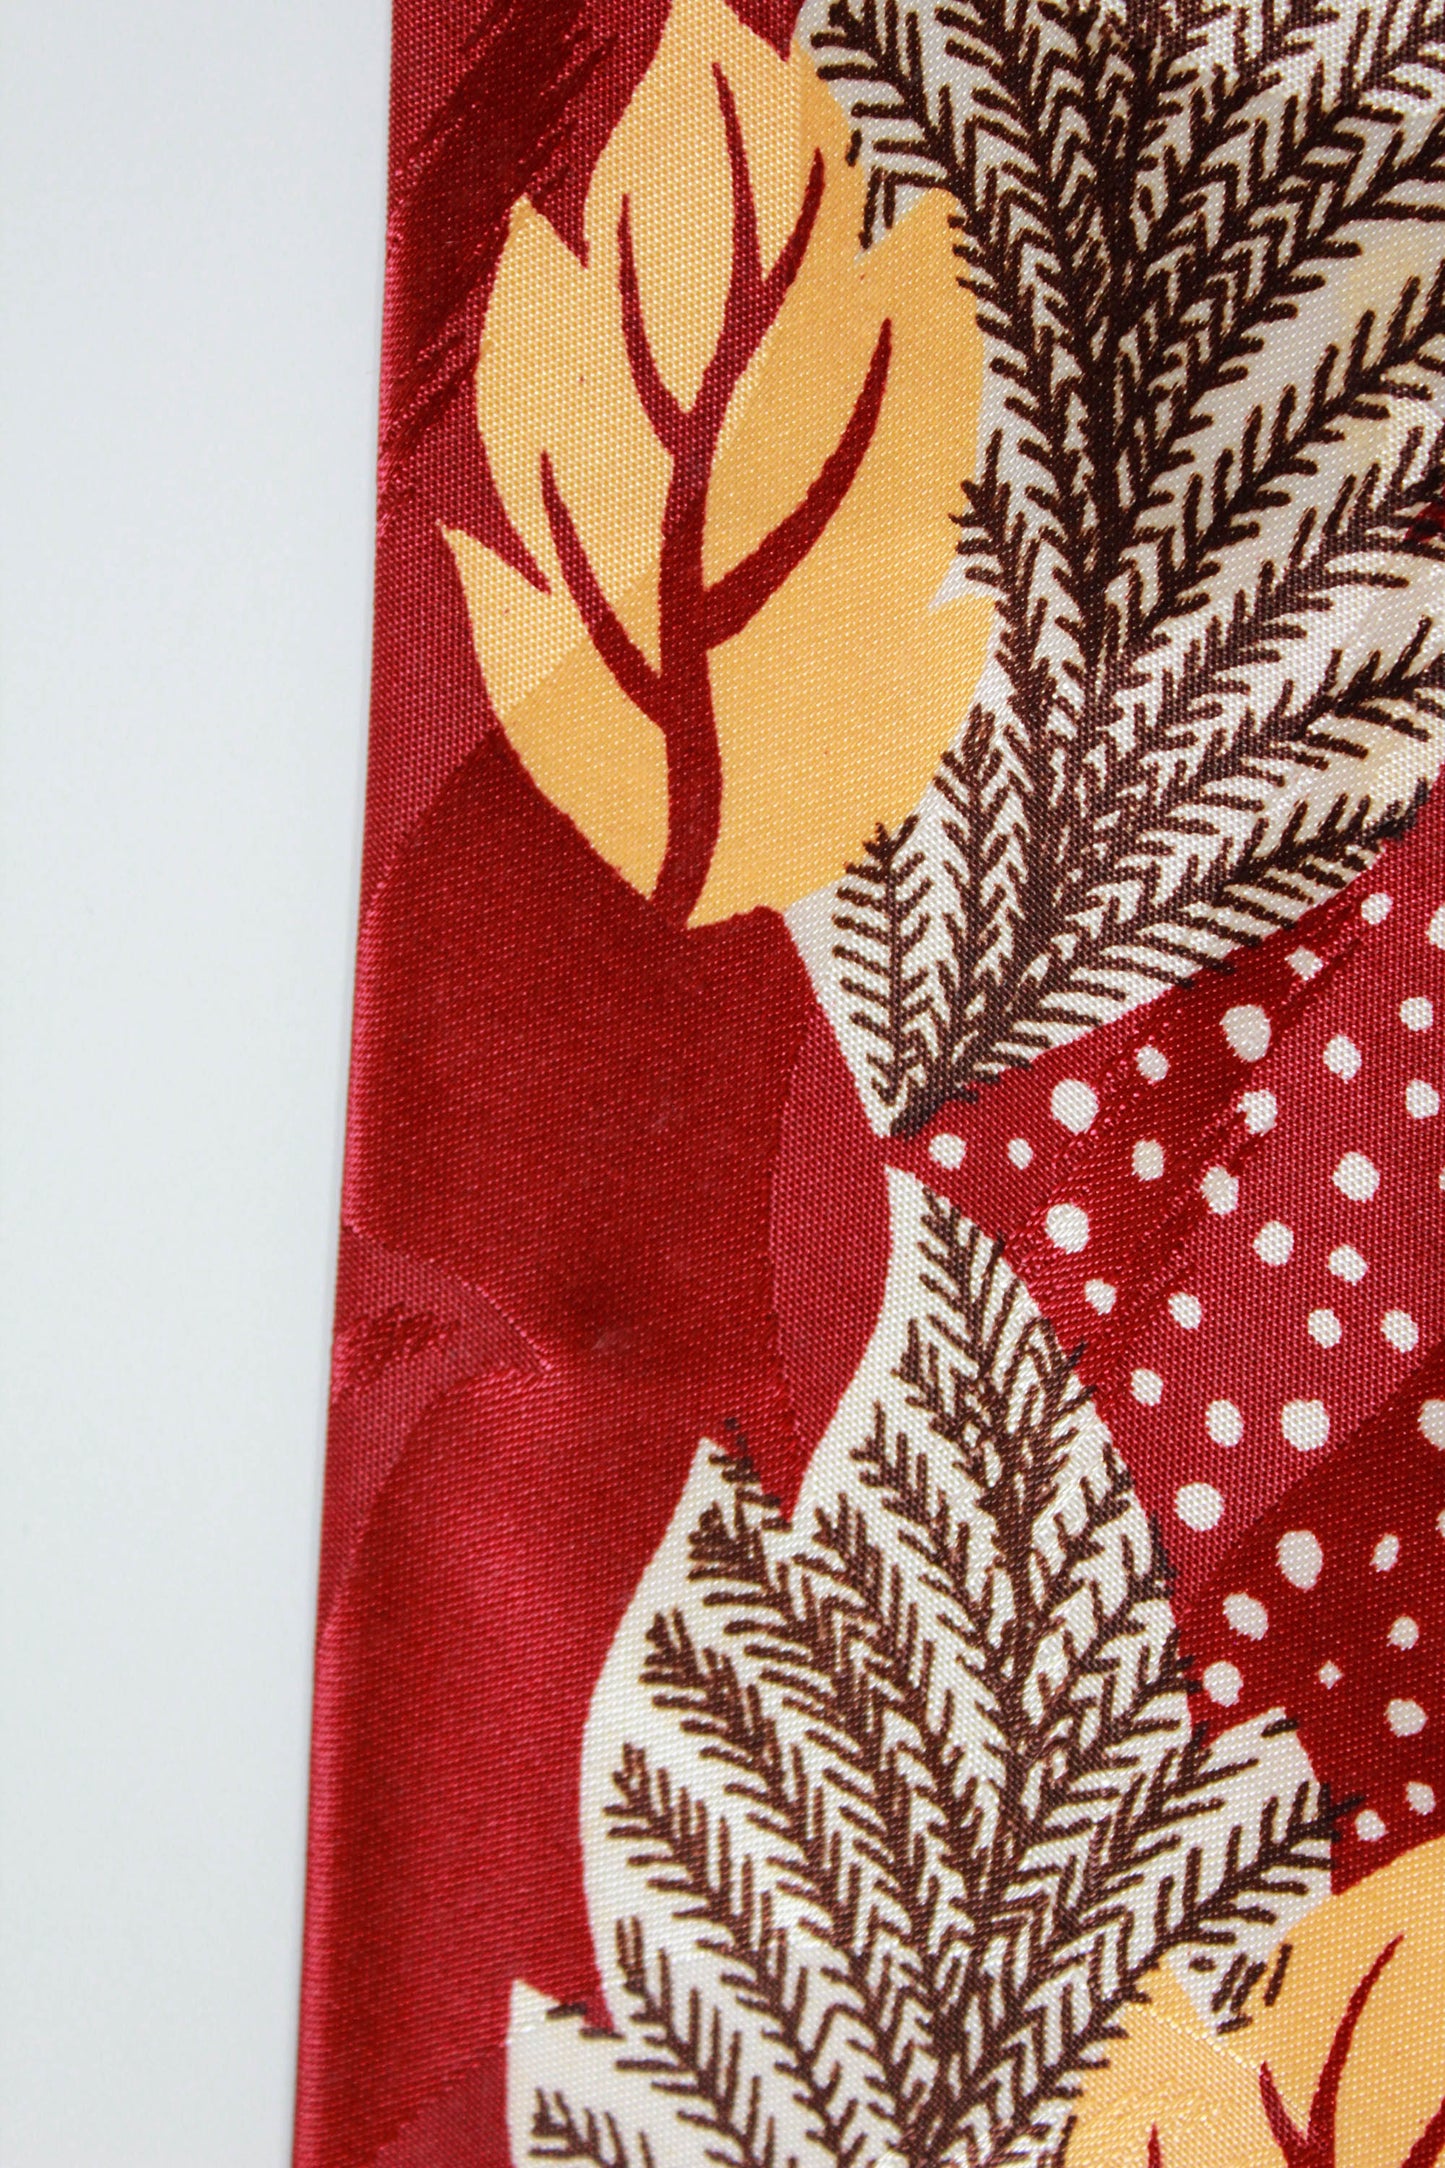 1940s Red Rayon Necktie with Leaf Print